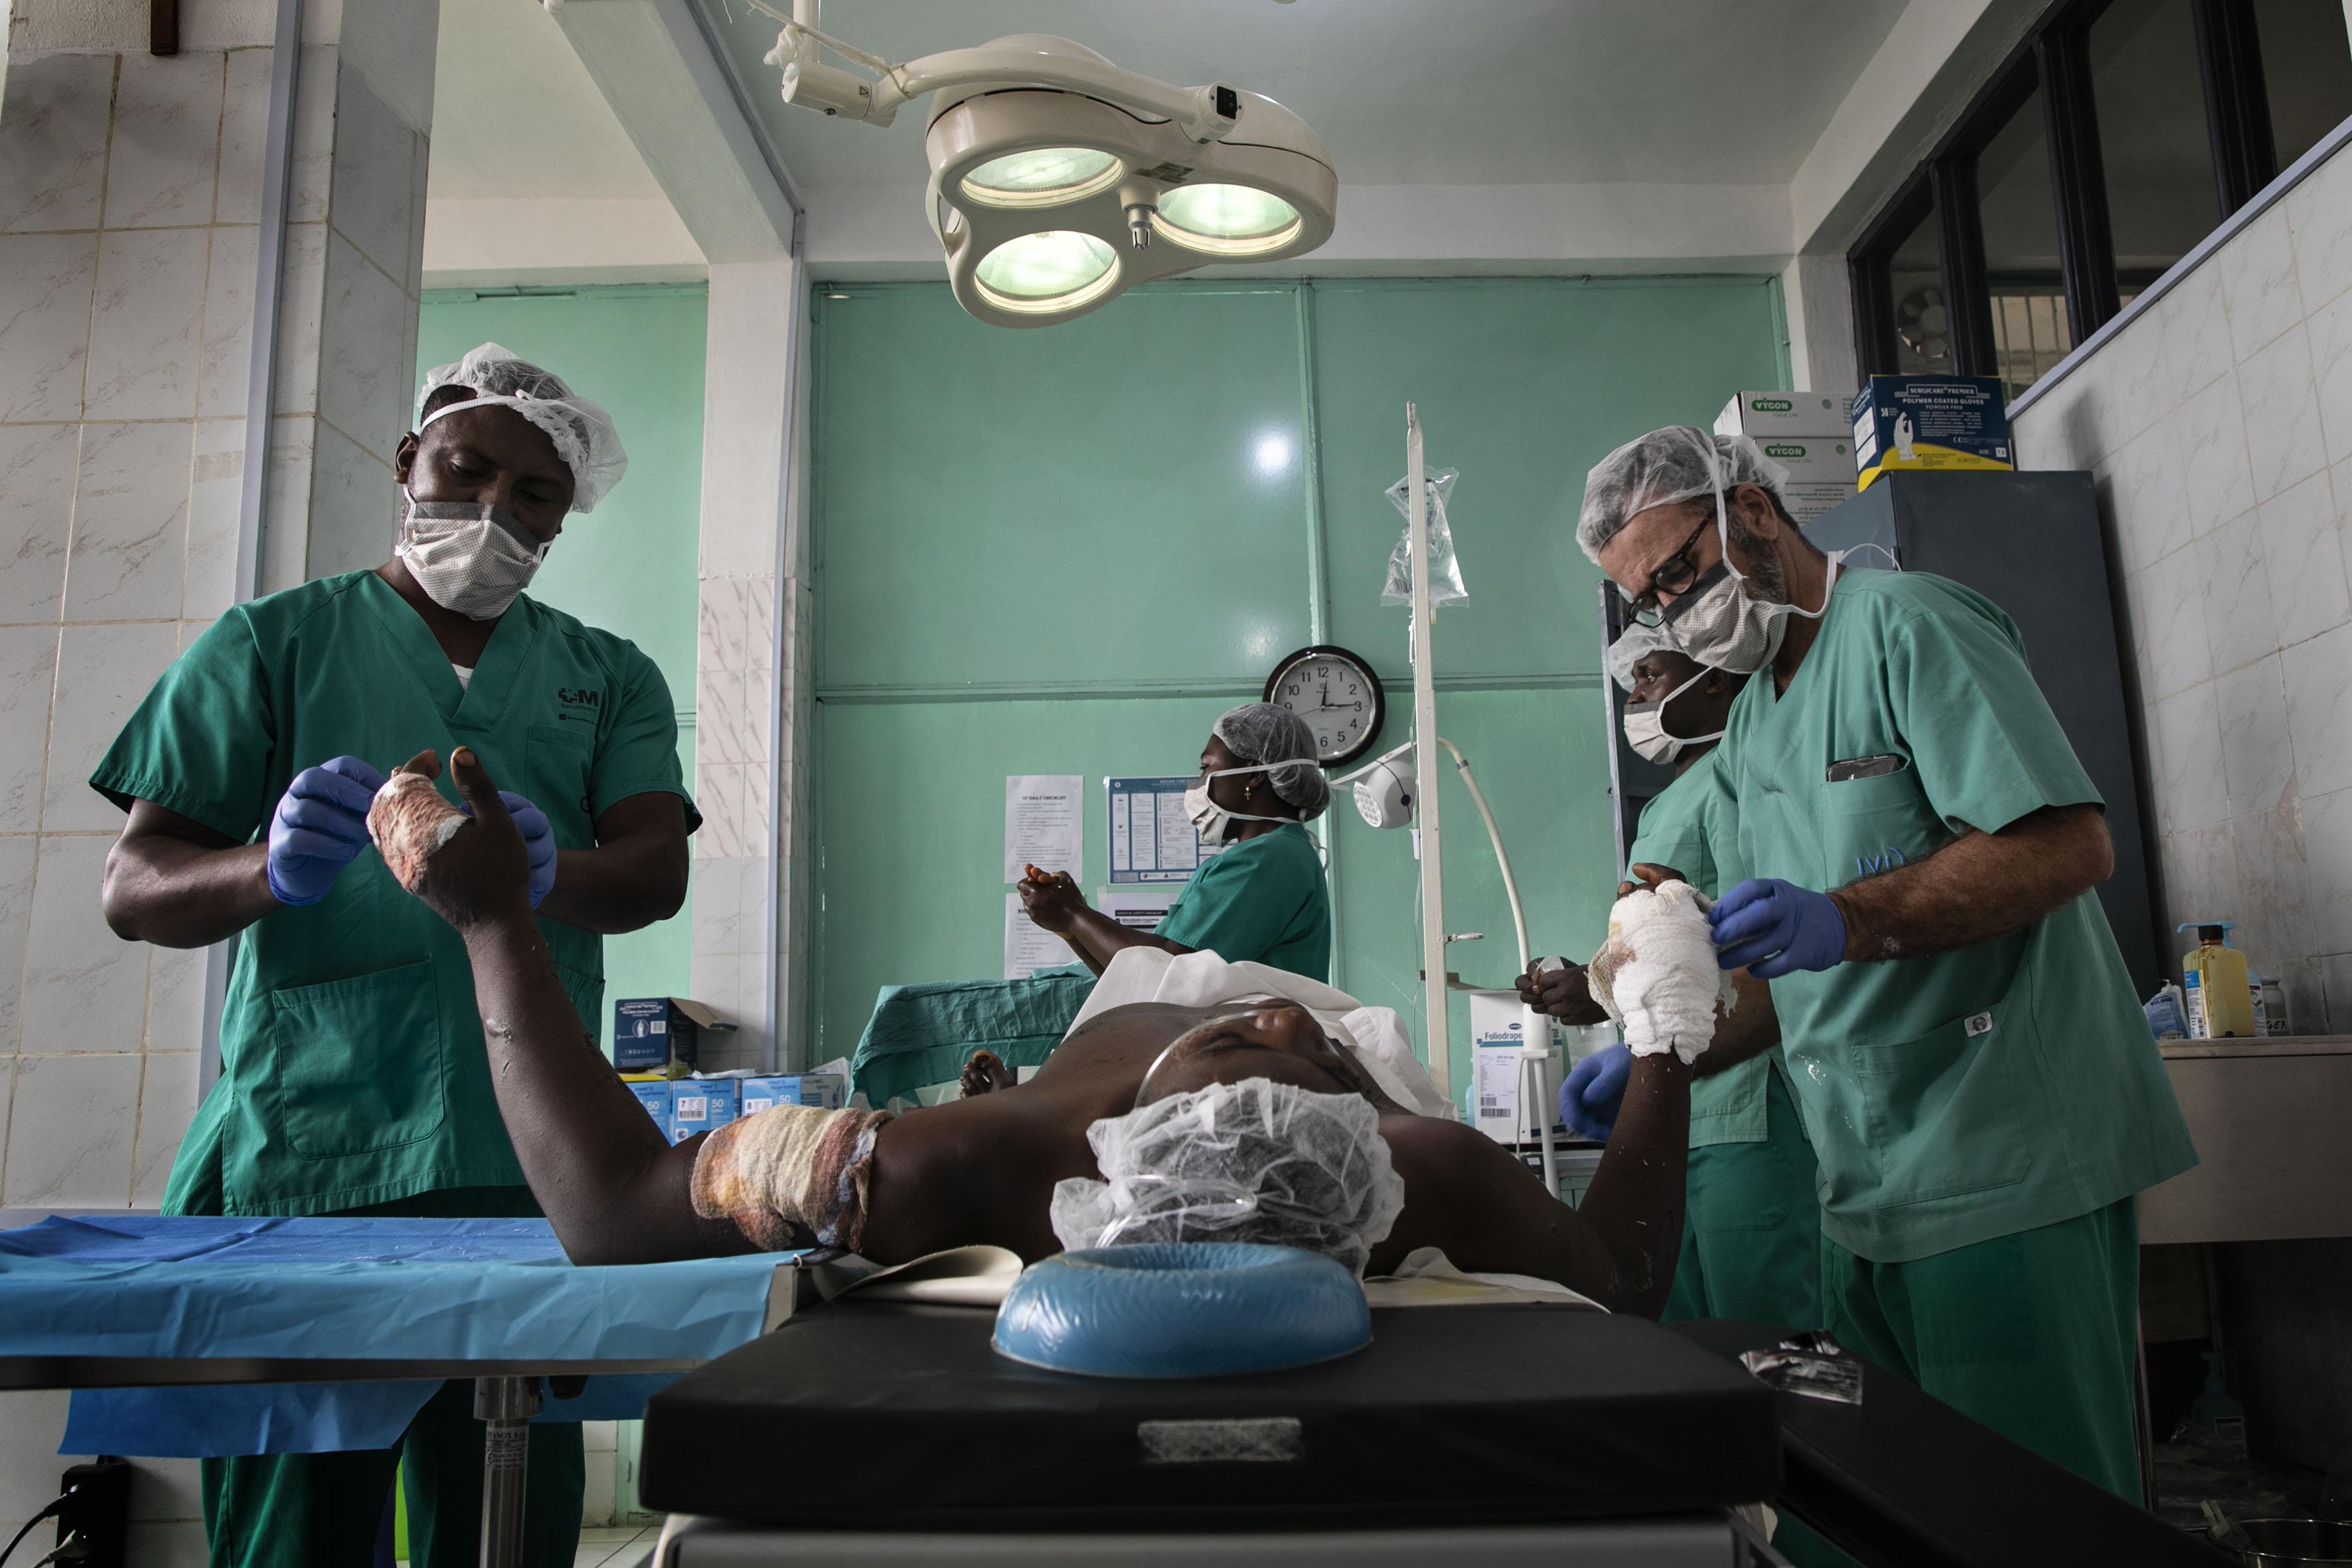 MSF surgeons provide care to a patient at St Mary Hospital in Bamenda, Northwest region. Cameroon.